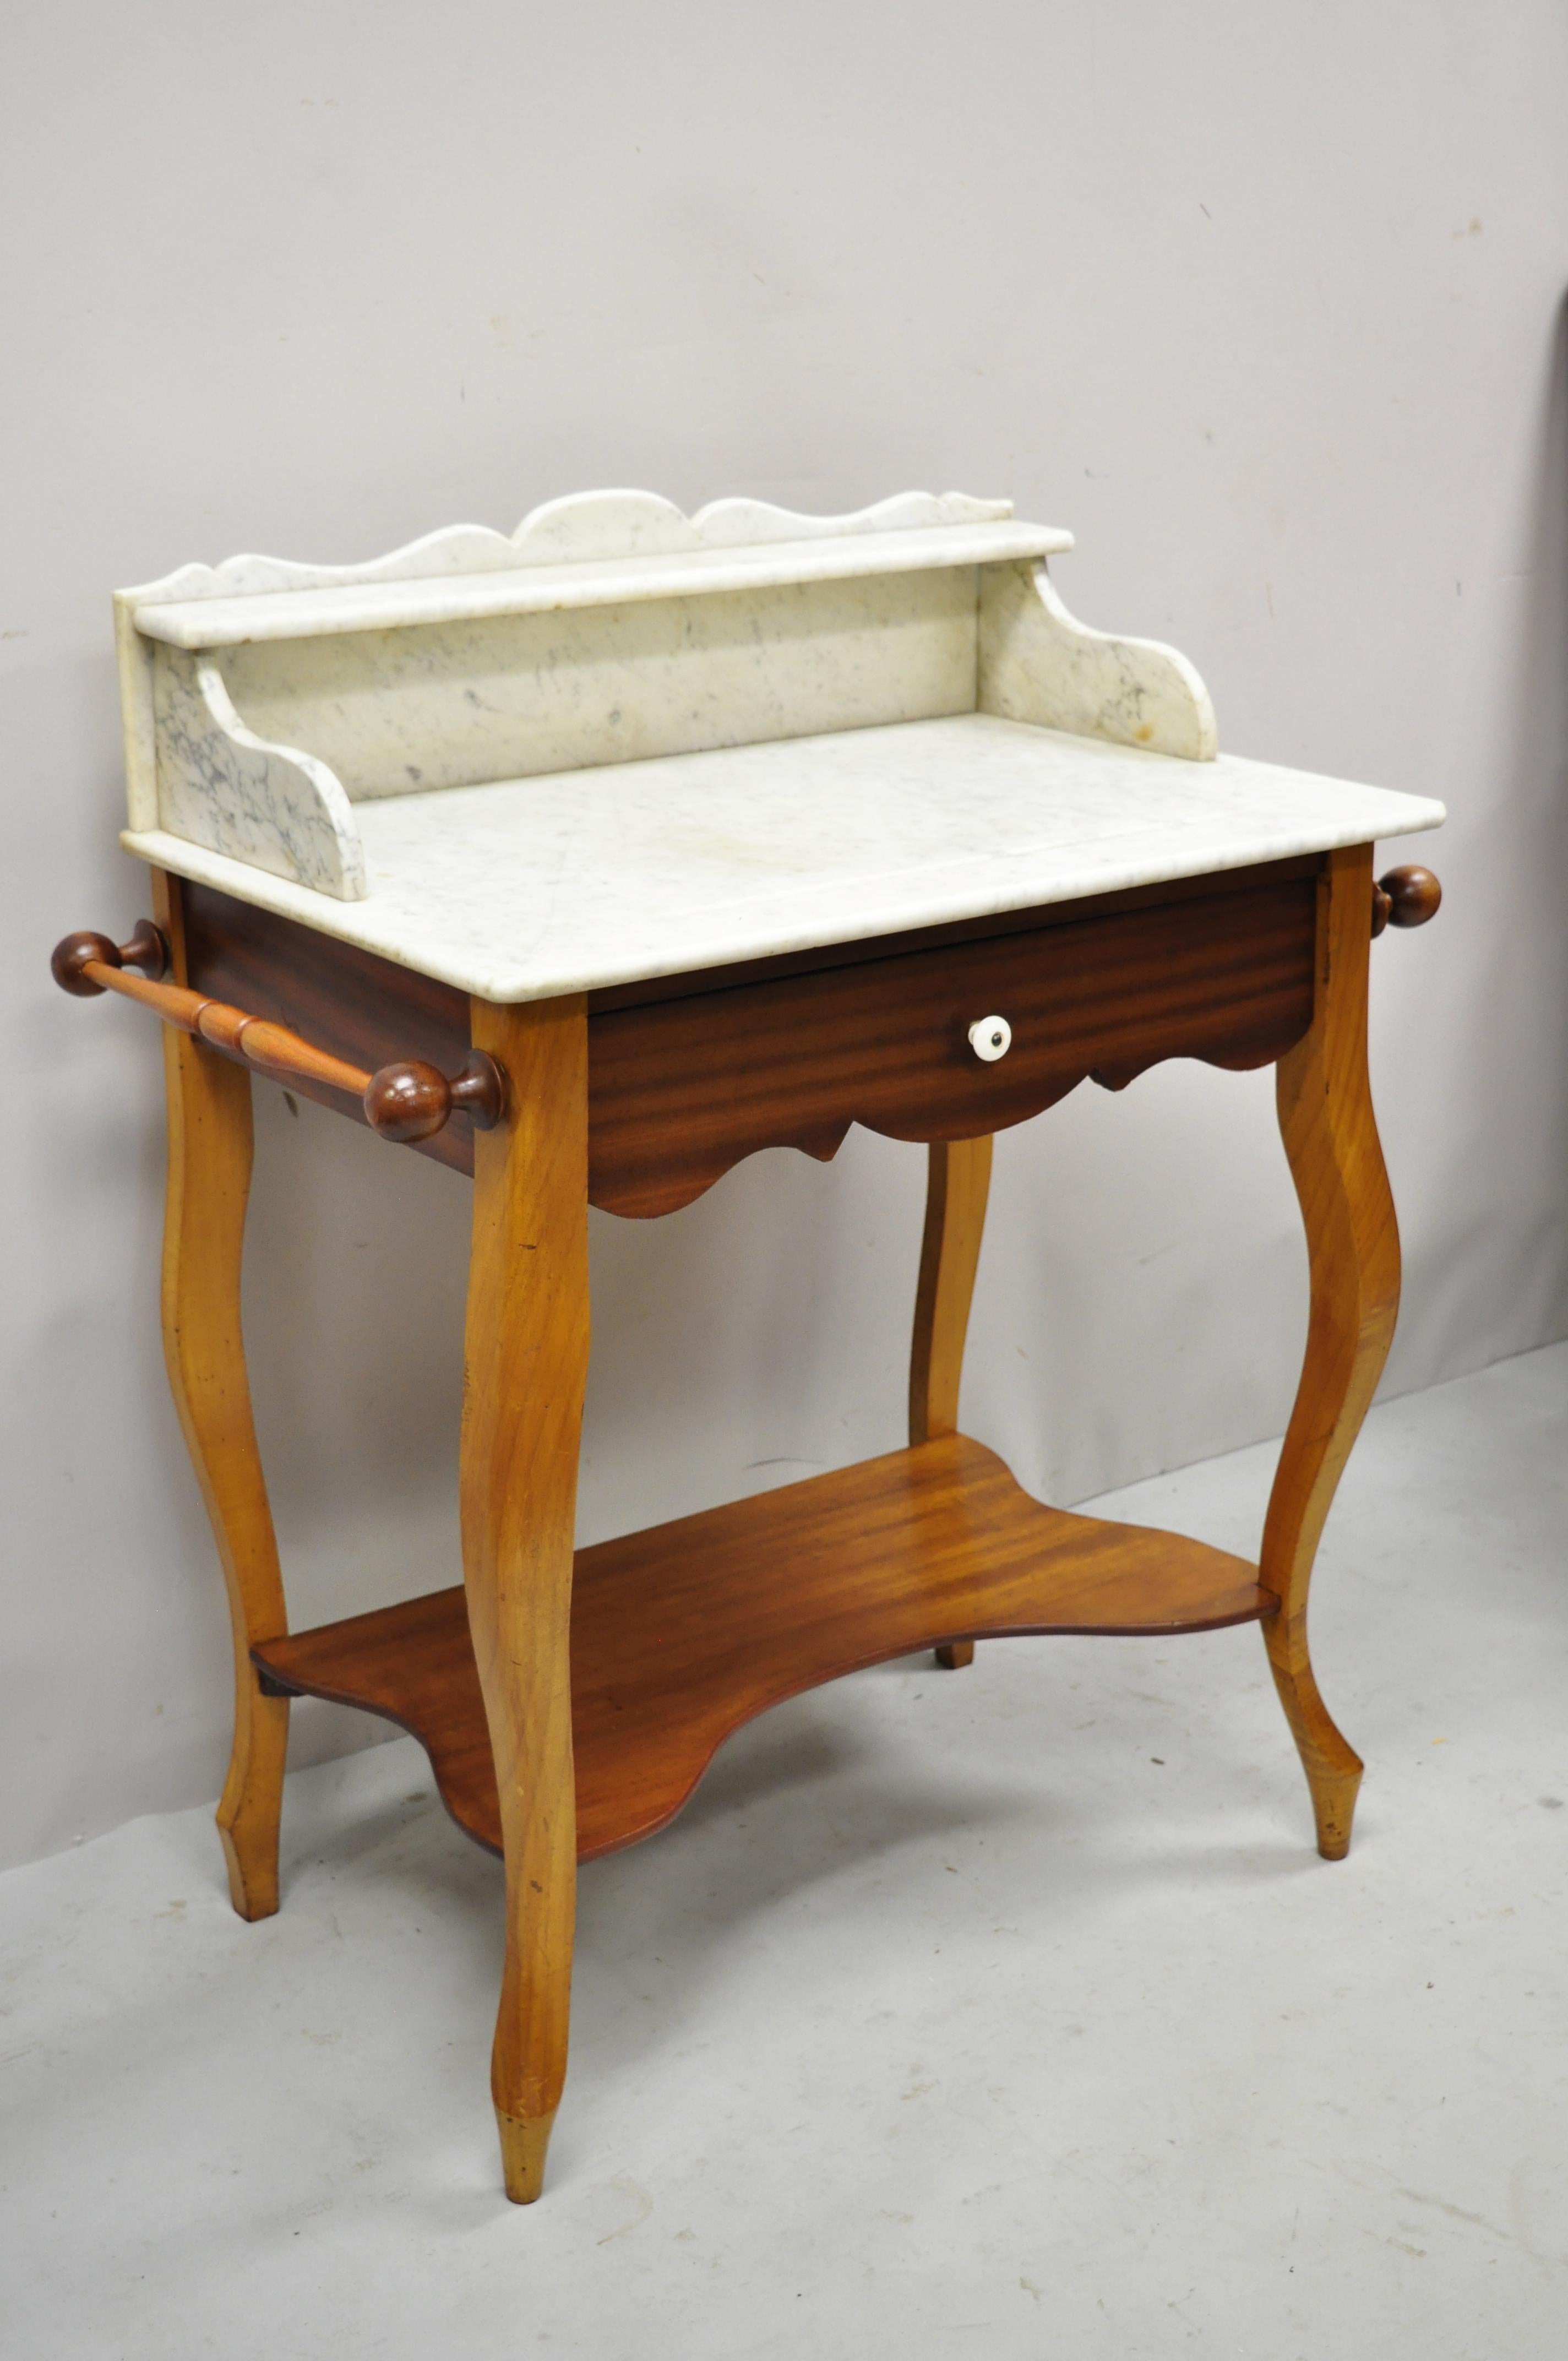 Antique American Victorian mahogany washstand commode marble top backsplash vanity. Item features marble top with backsplash, (2) towel bars/rods, beautiful wood grain, 1 dovetailed drawer, very nice antique item. 37